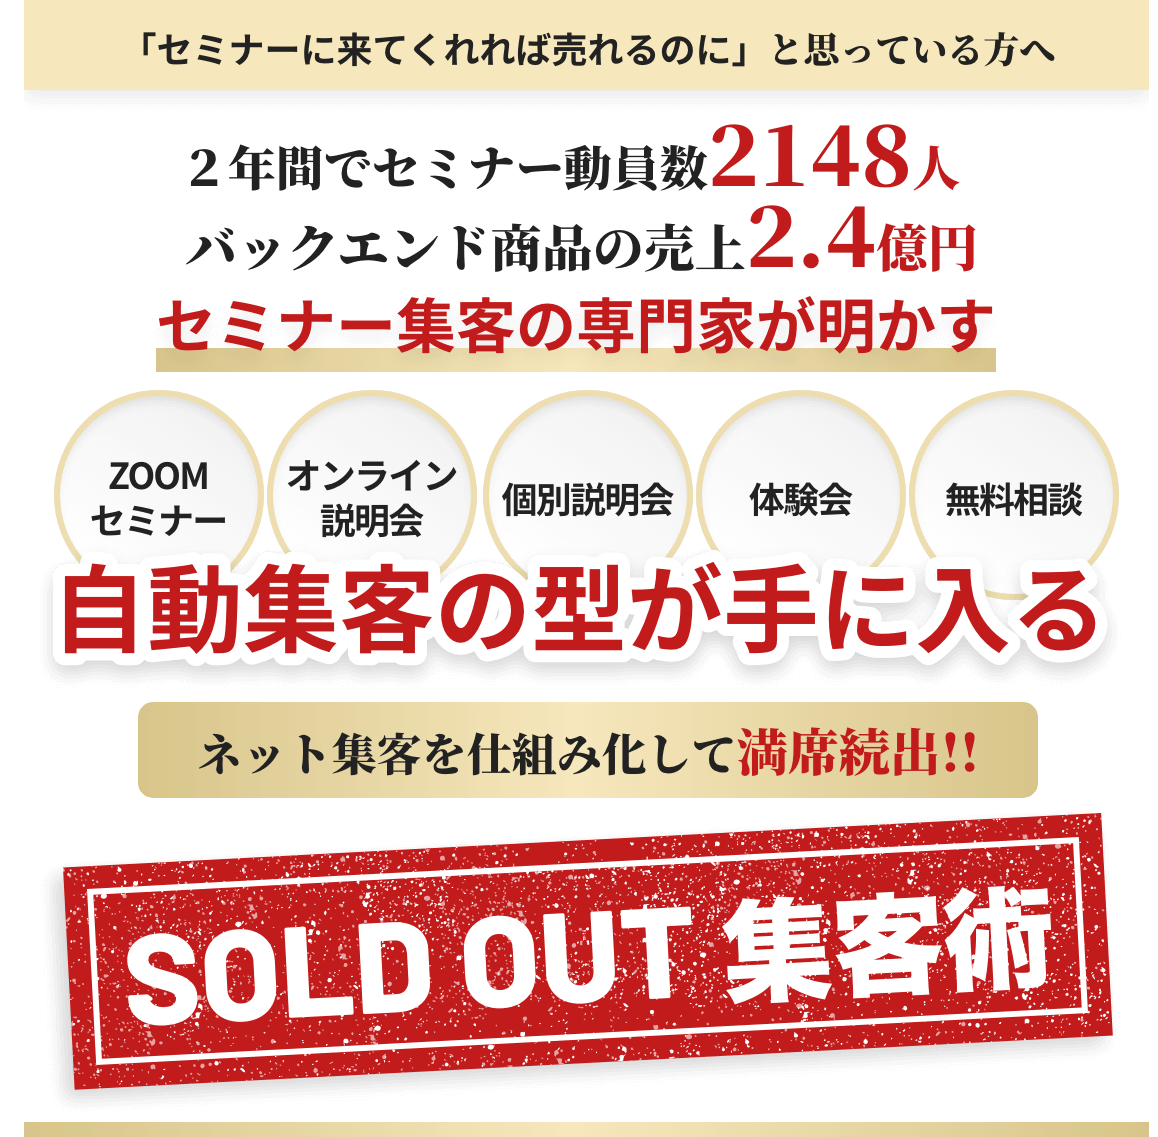 SOLD OUT集客術